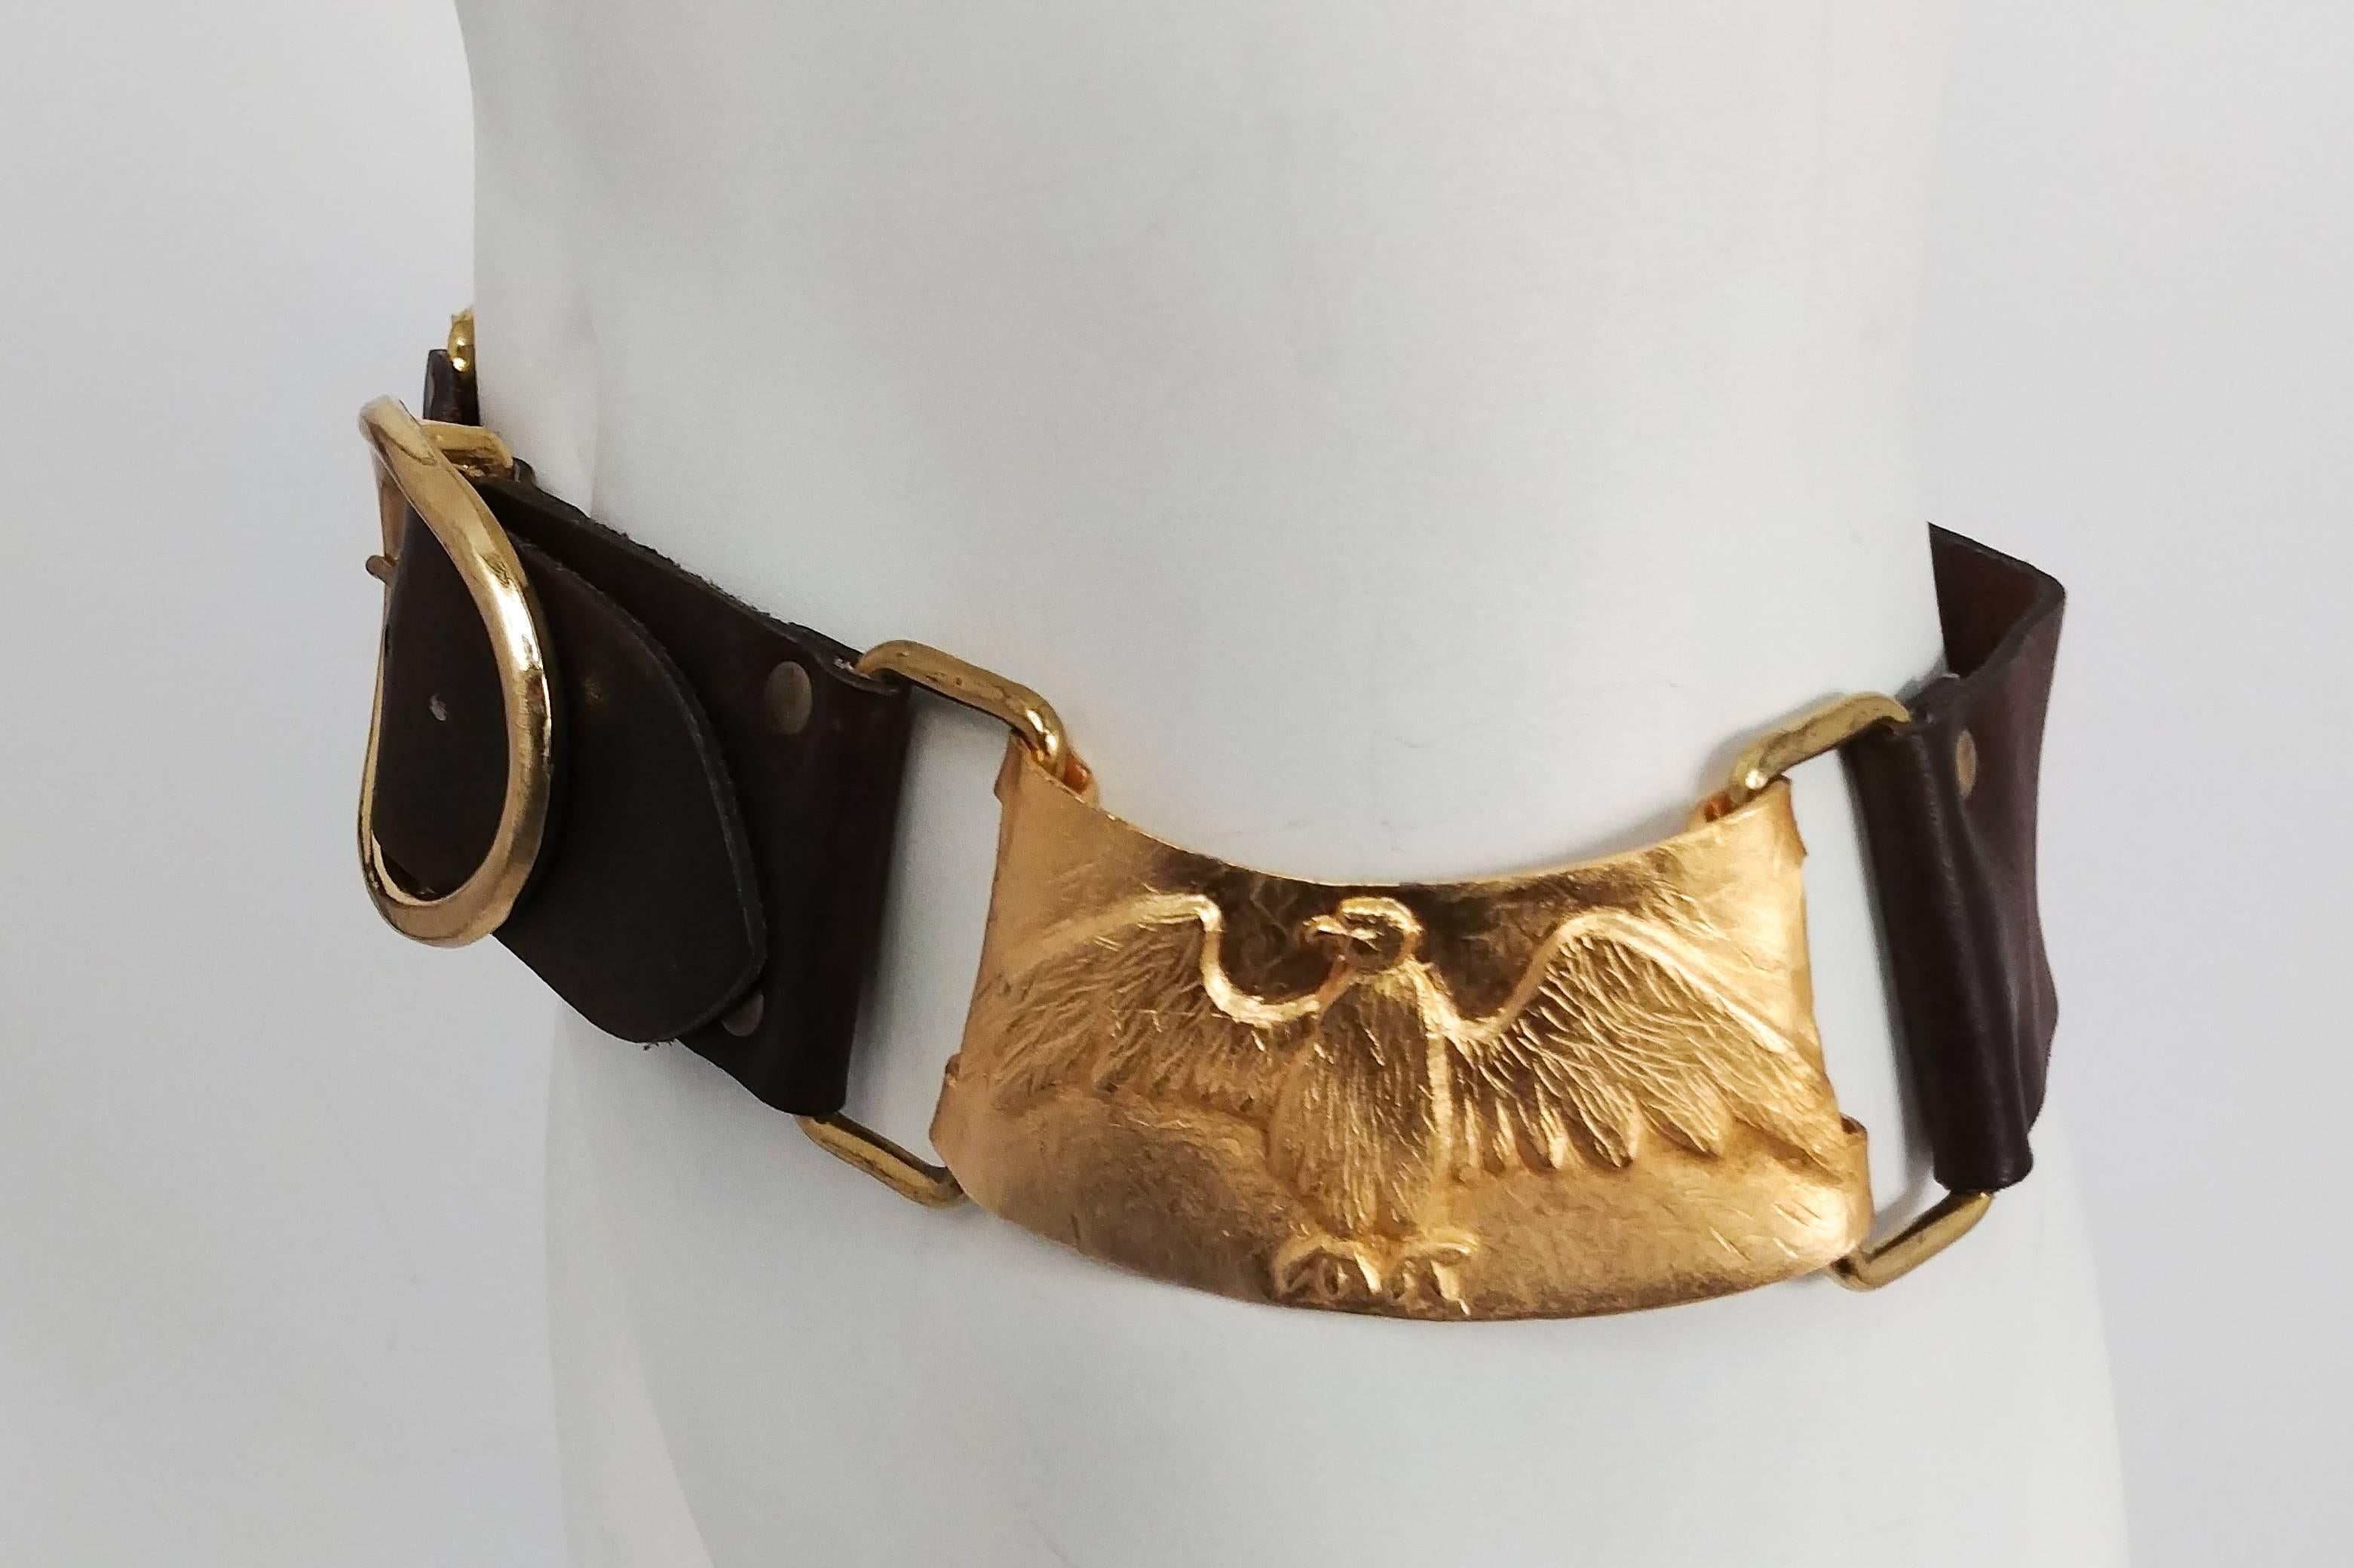 1970s Castlecliff Golden Eagles & Leather Belt. Thick brushed links between each leather pieced. Large oval front buckle, nonremovable. 31.5